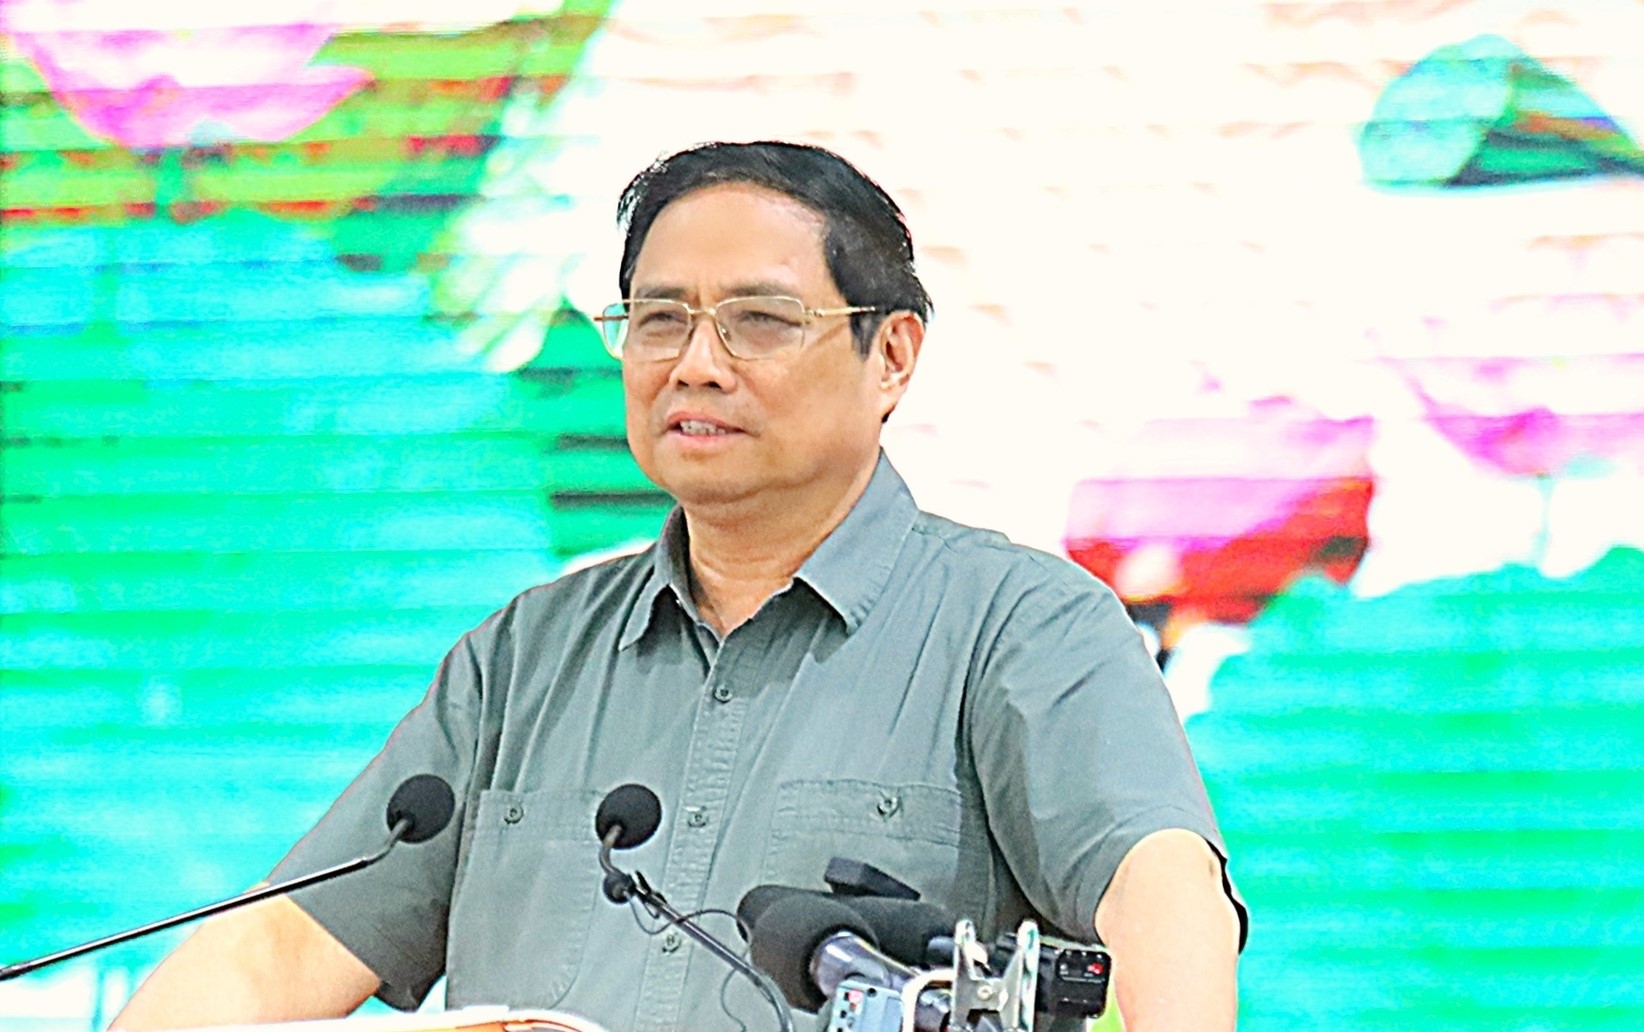 Prime Minister Pham Minh Chinh requests ministries, branches, and localities in the Mekong Delta region to raise awareness about the dangers and consequences of landslides in the Mekong Delta. Photo: Kim Anh.